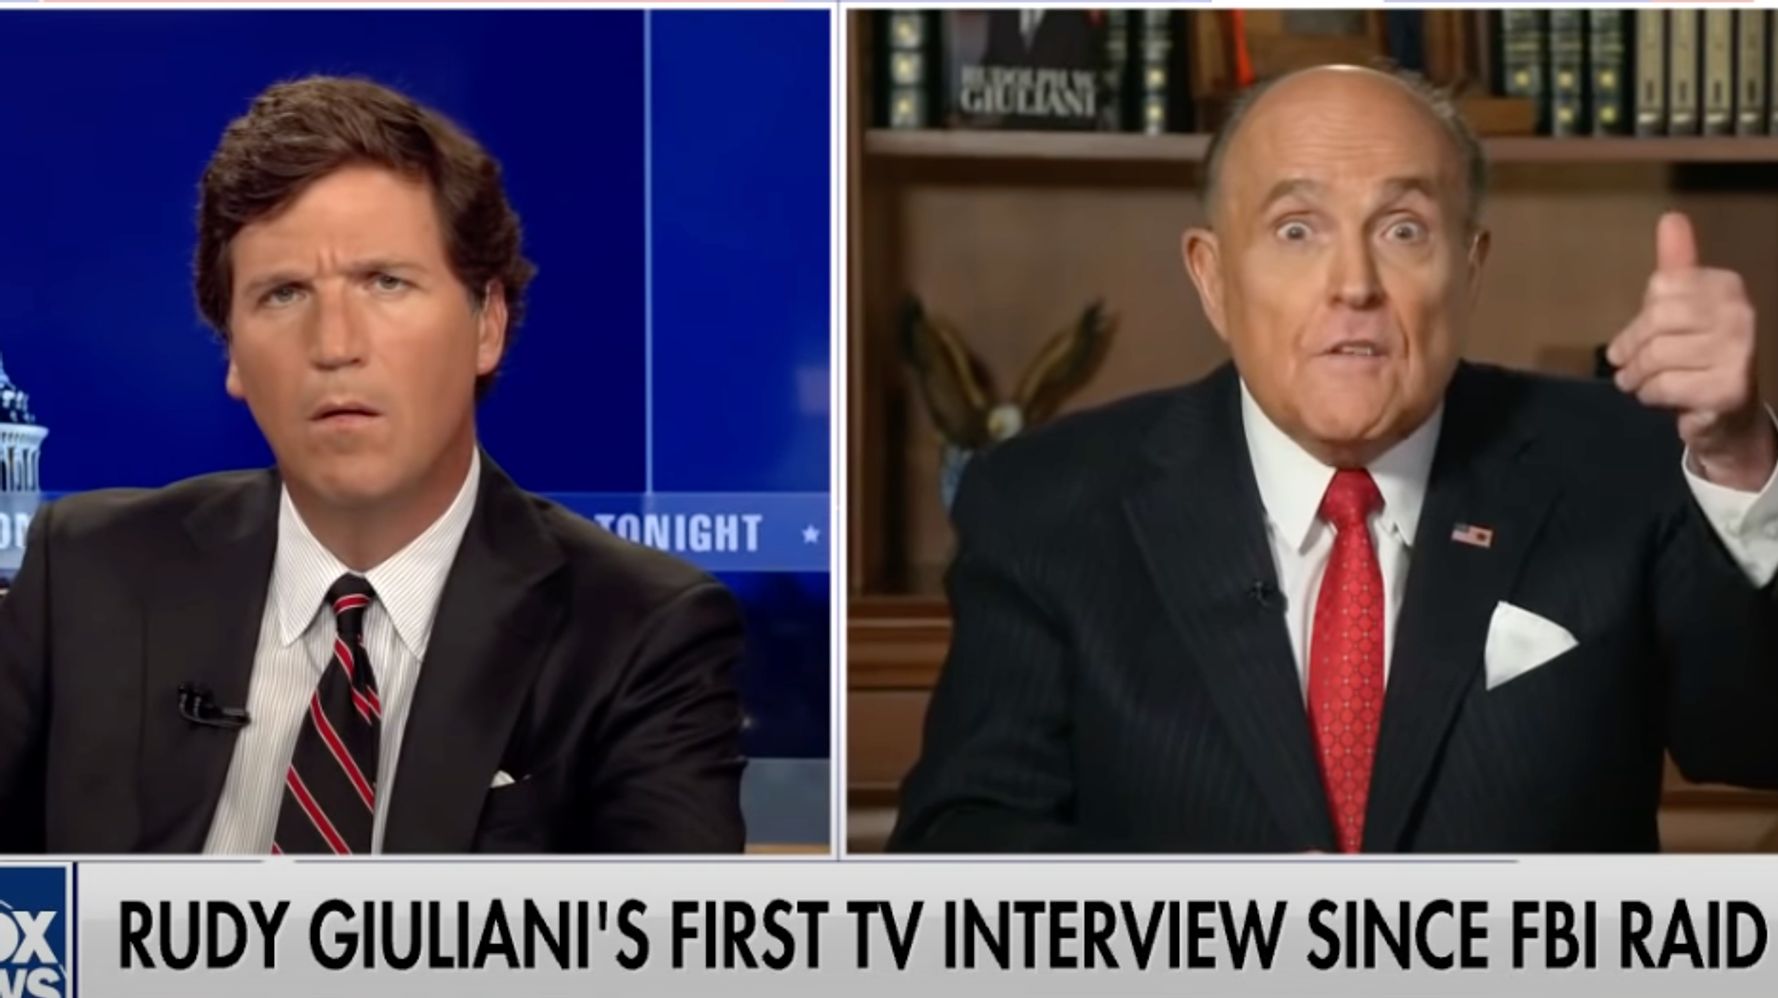 Rudy Giuliani's First Interview About FBI Raid Goes Just As You'd Expect